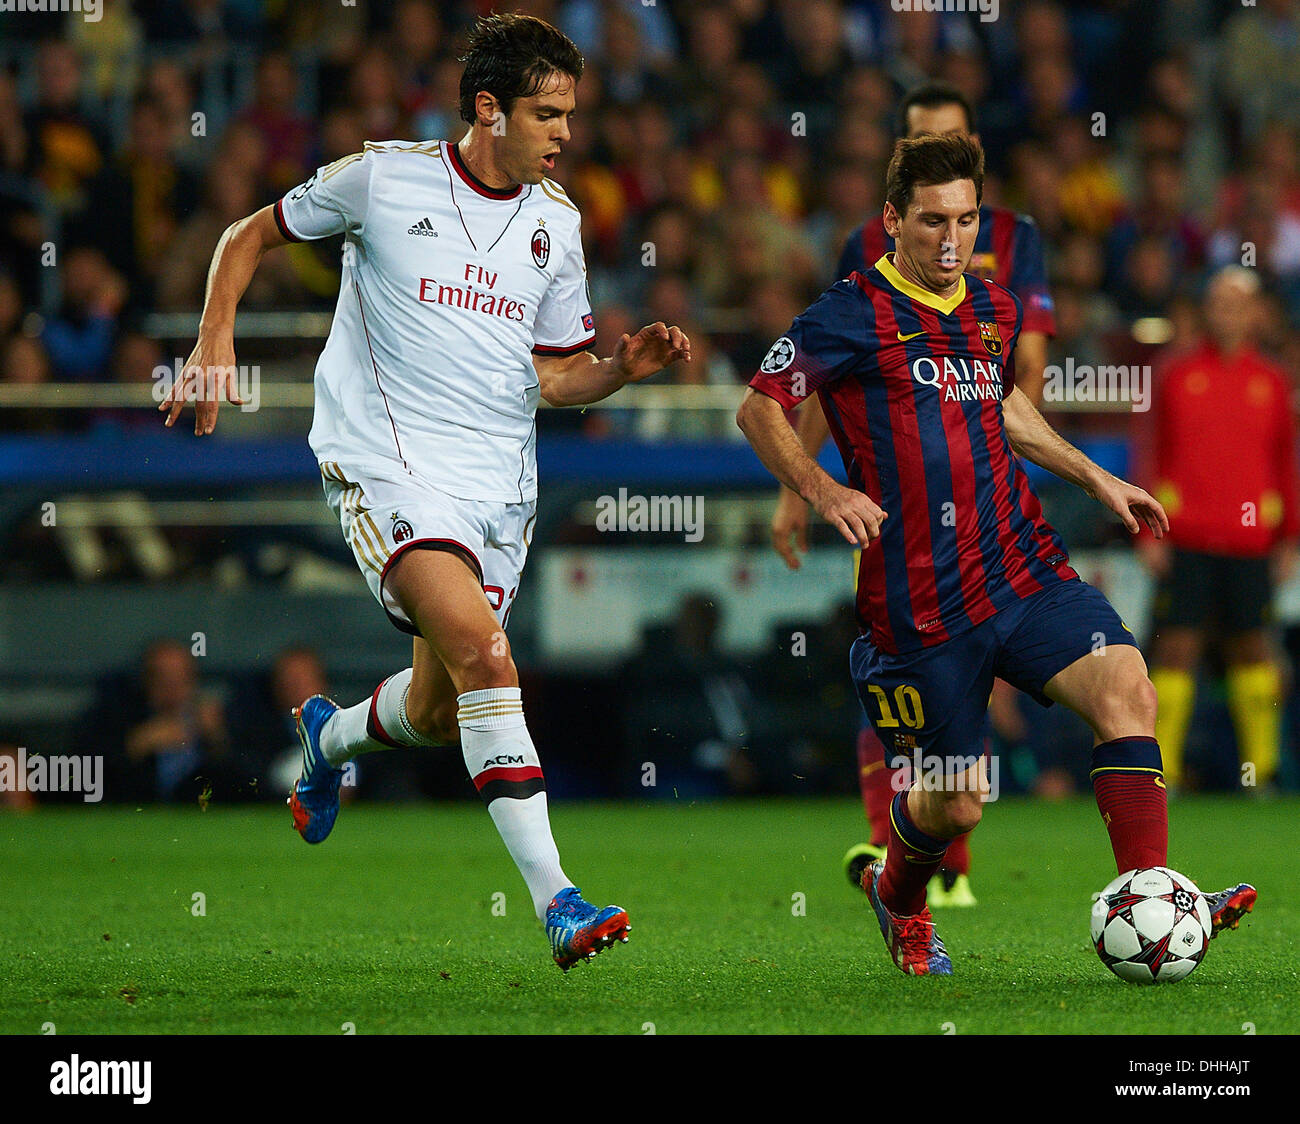 Kaka (AC Milan) duels for the ball against Lionel Messi (FC Barcelona), during the Champions League soccer match between FC Barcelona and AC Milan, at the Camp Nou stadium in Barcelona, Spain, wednesday, november 6, 2013. Foto: S.Lau Stock Photo